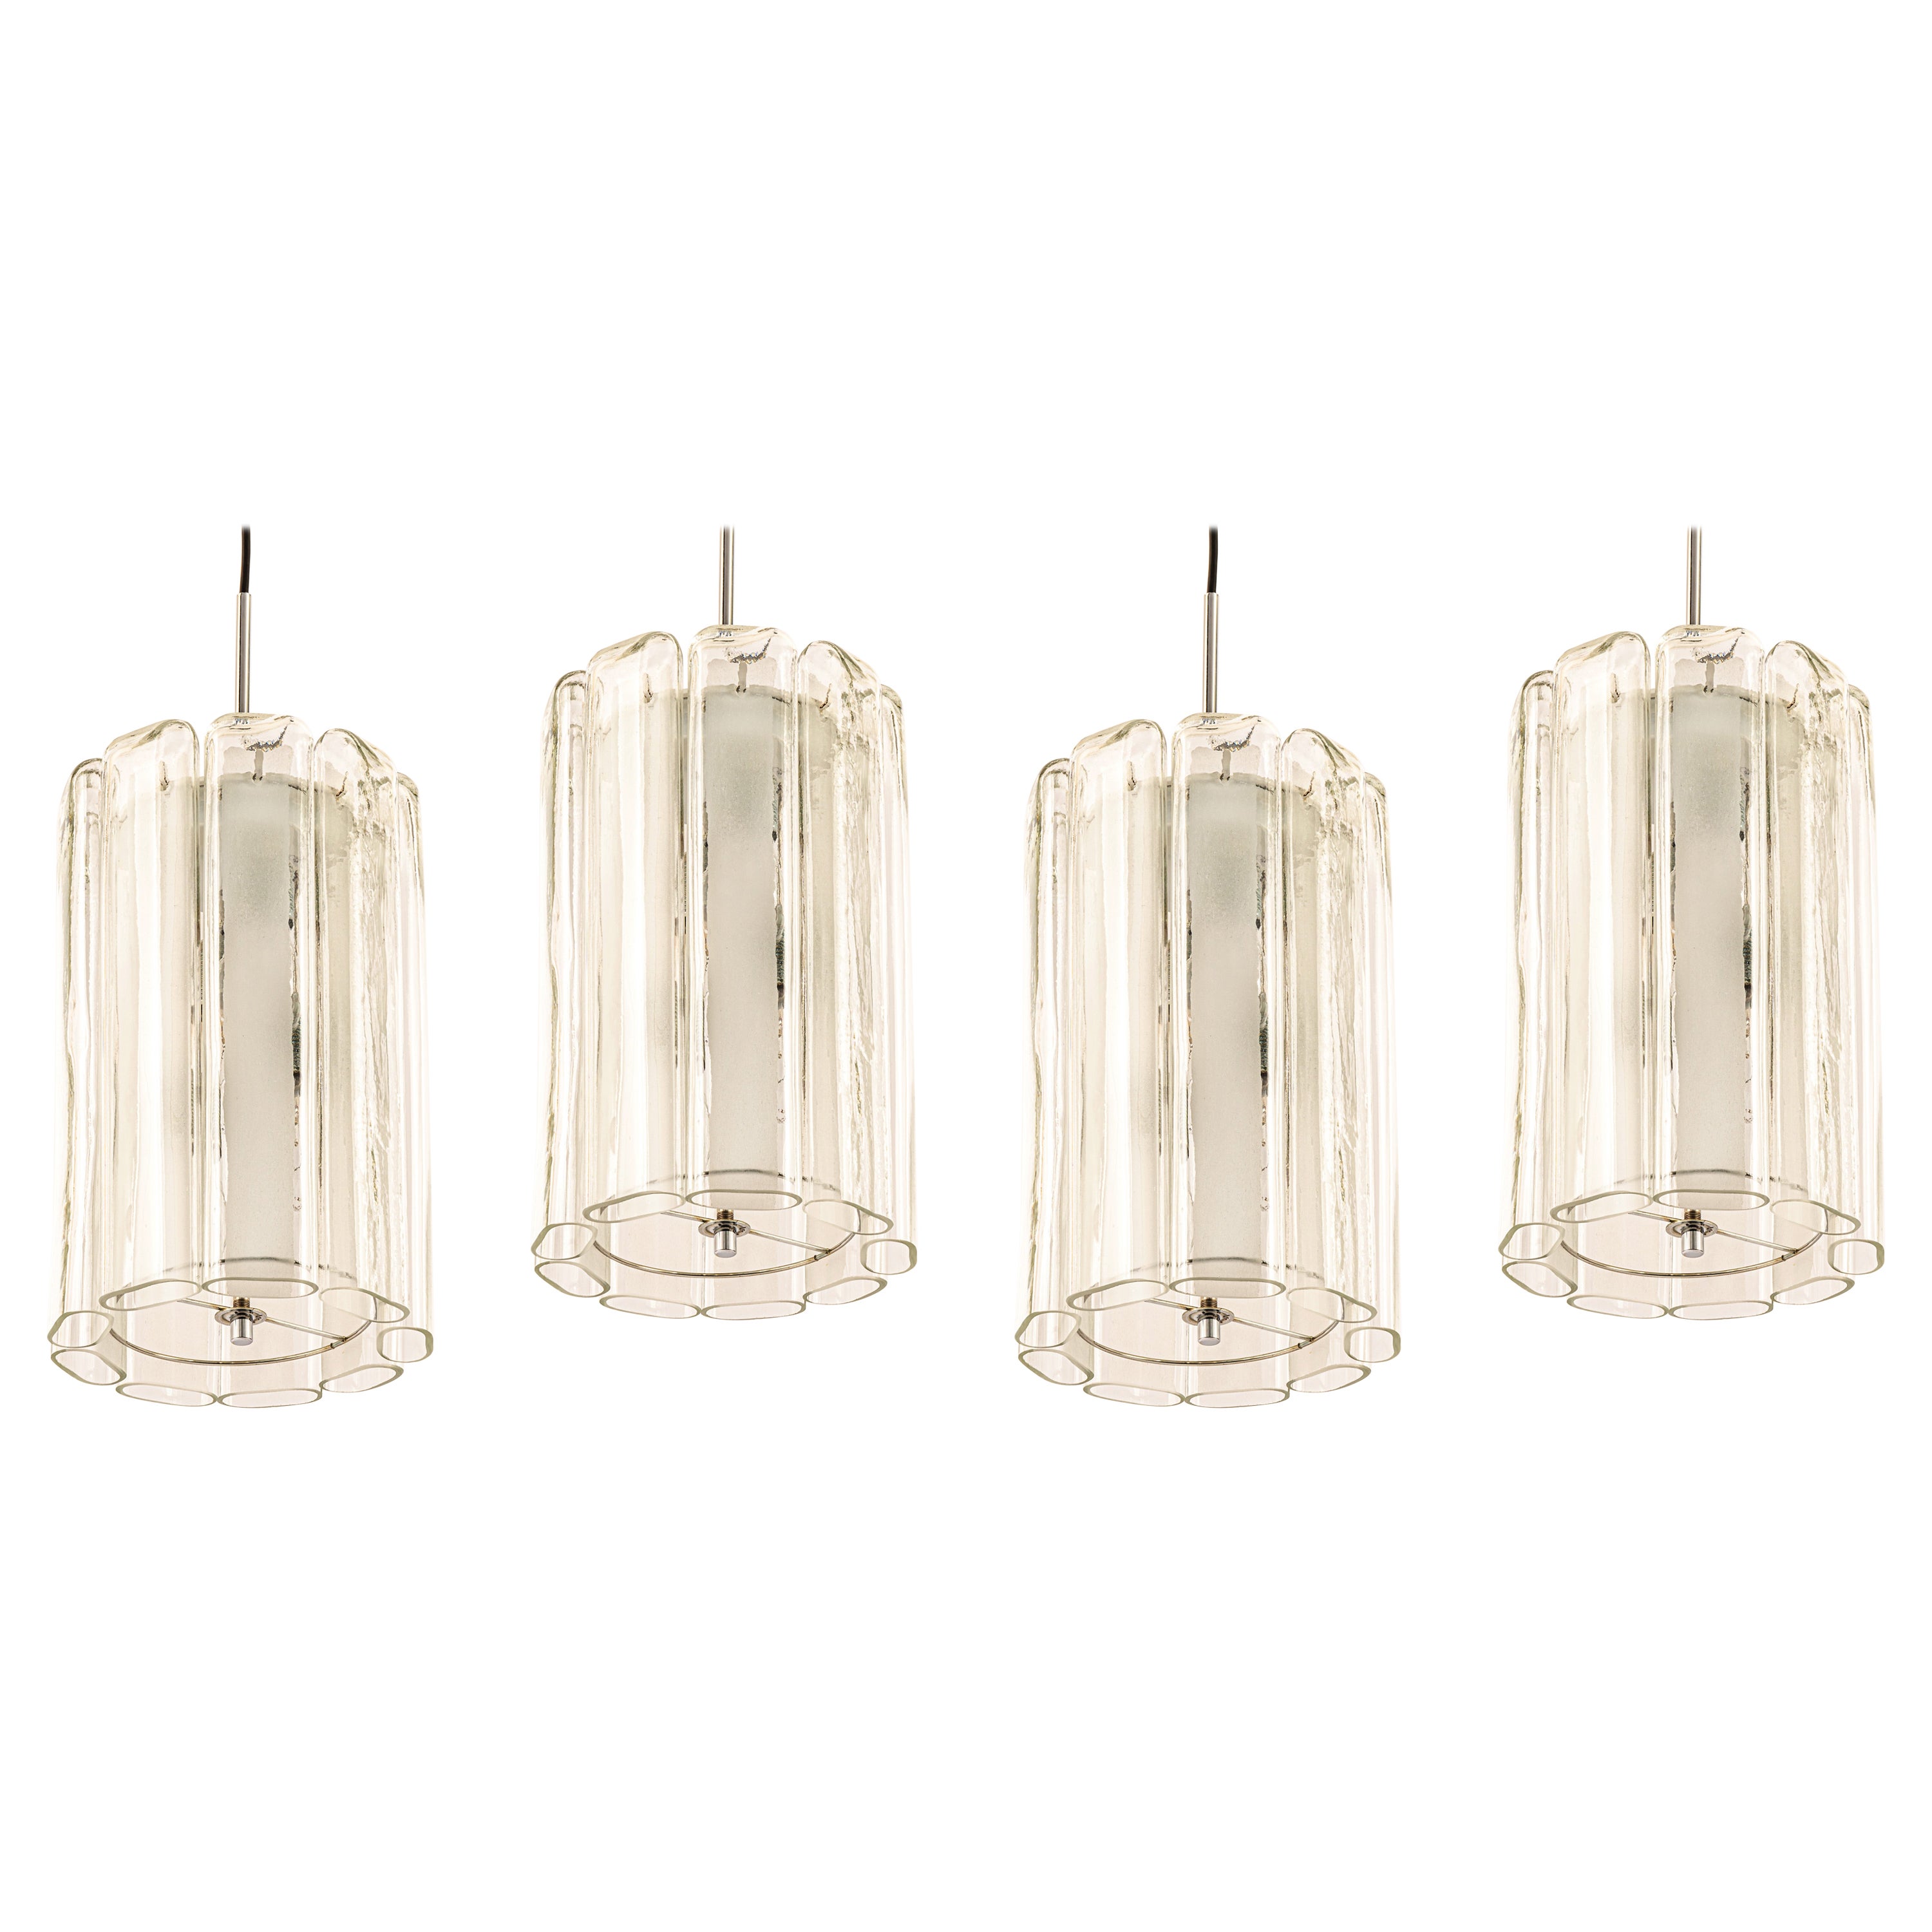 1 of 6 Cylindrical Pendant Fixture with Crystal Glass by Doria, Germany, 1970s For Sale